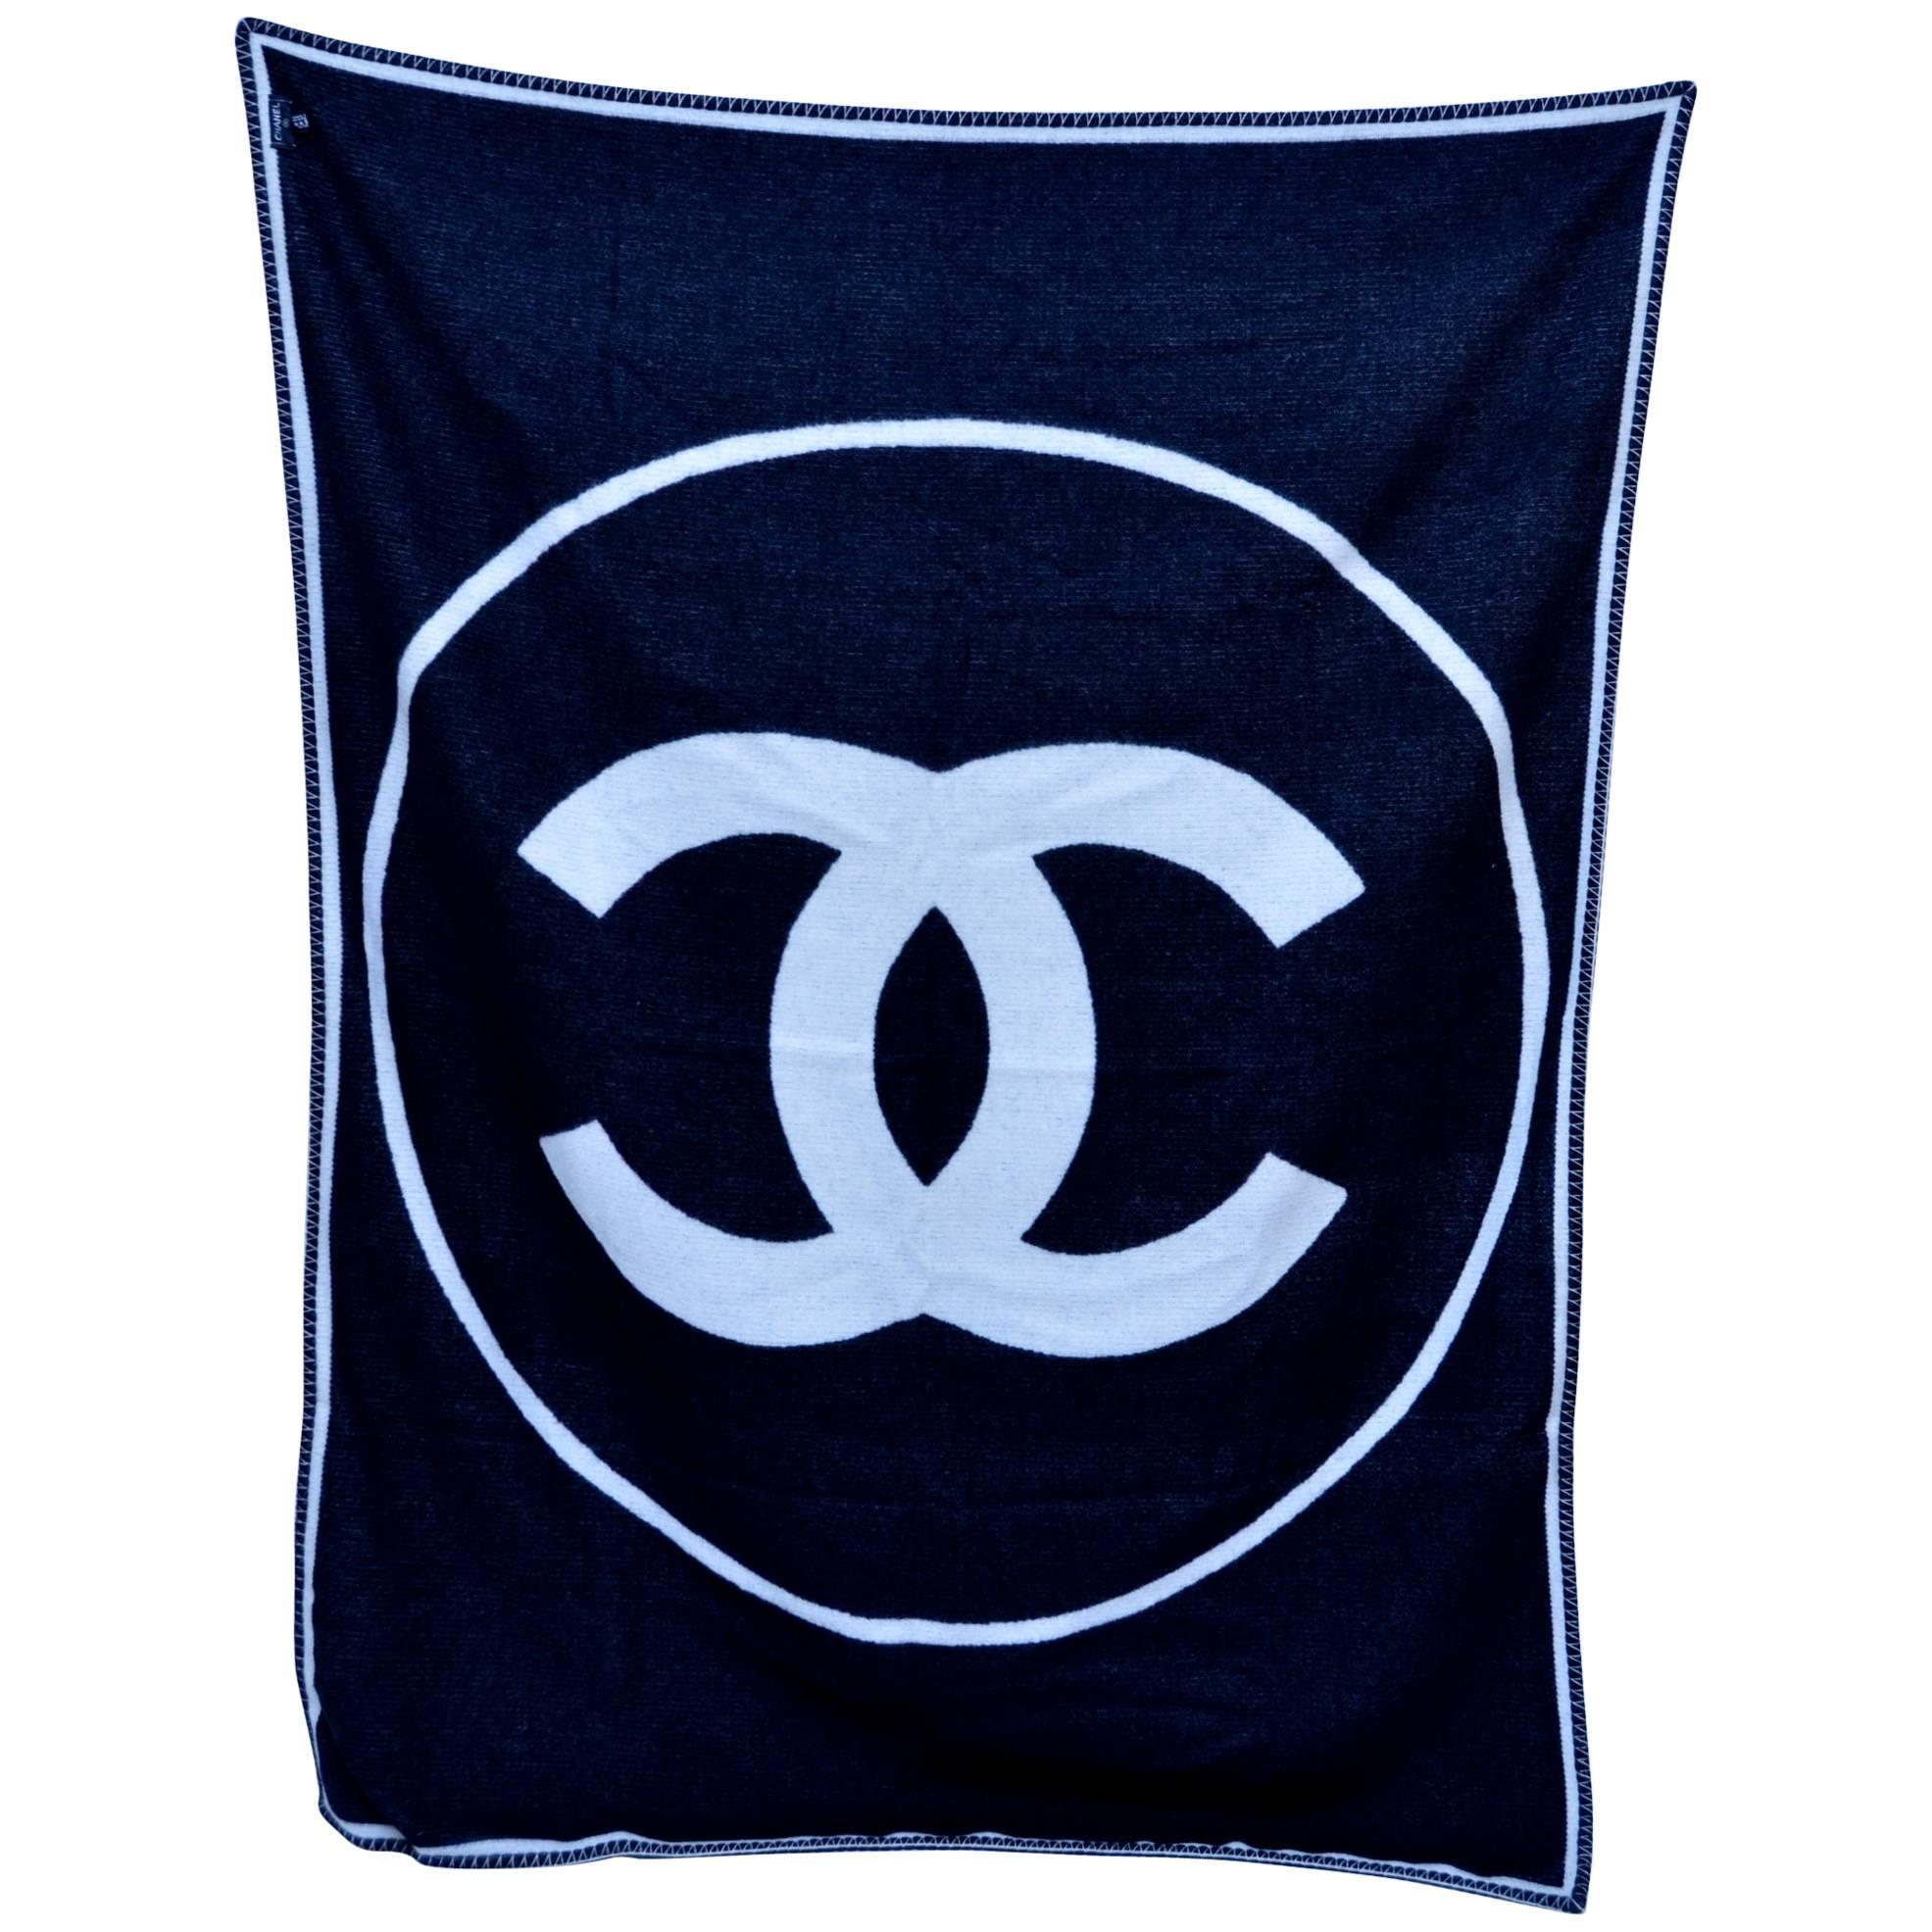 CHANEL Black and Off White Large CC Logo Travel Home Decor Throw